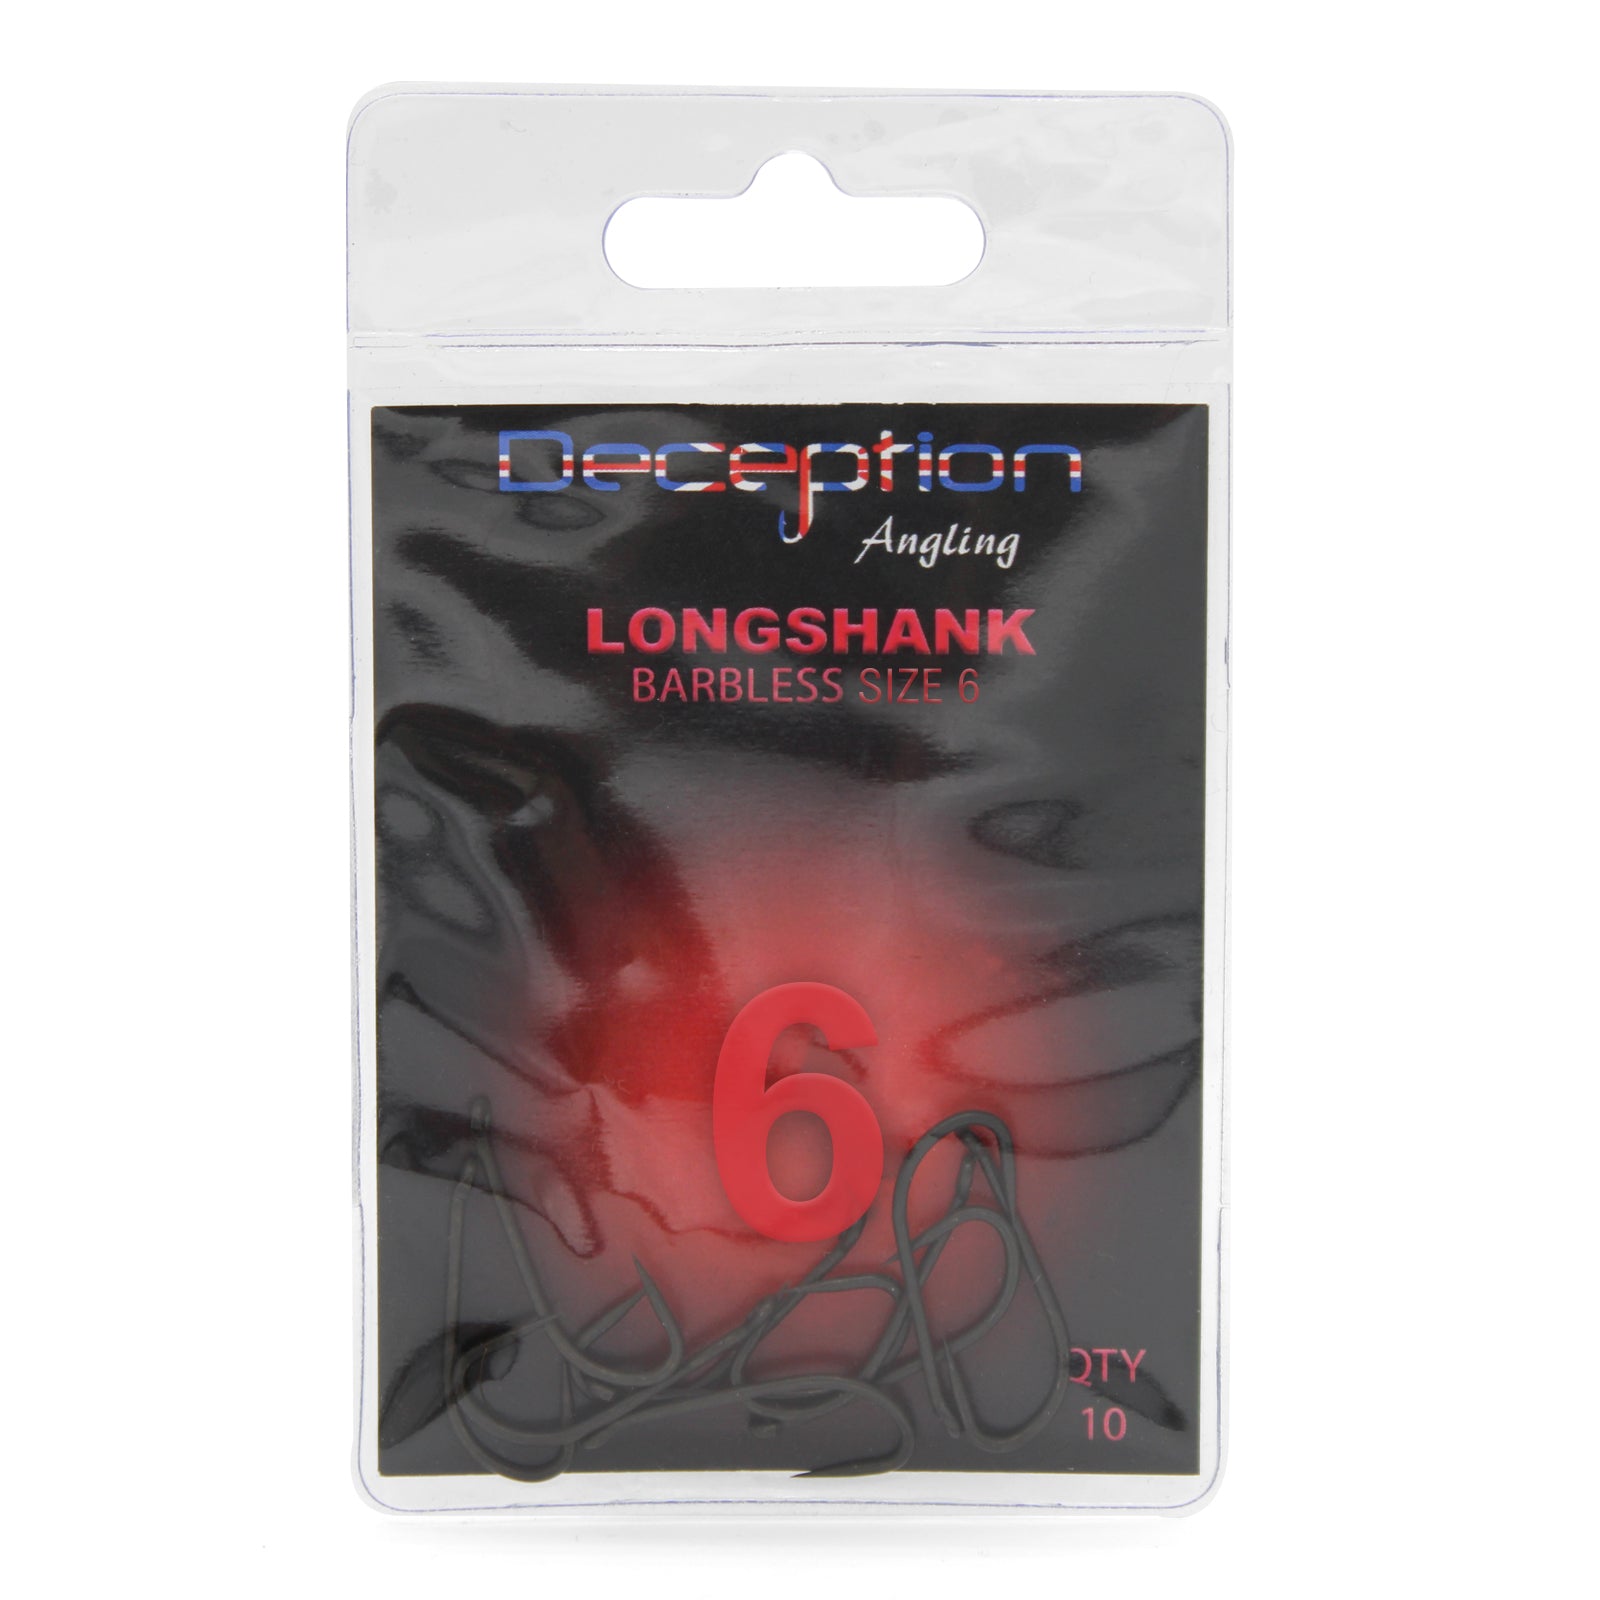 Deception Angling Long Shank Barbless Fishing Hooks Pack of 10 - Size 6